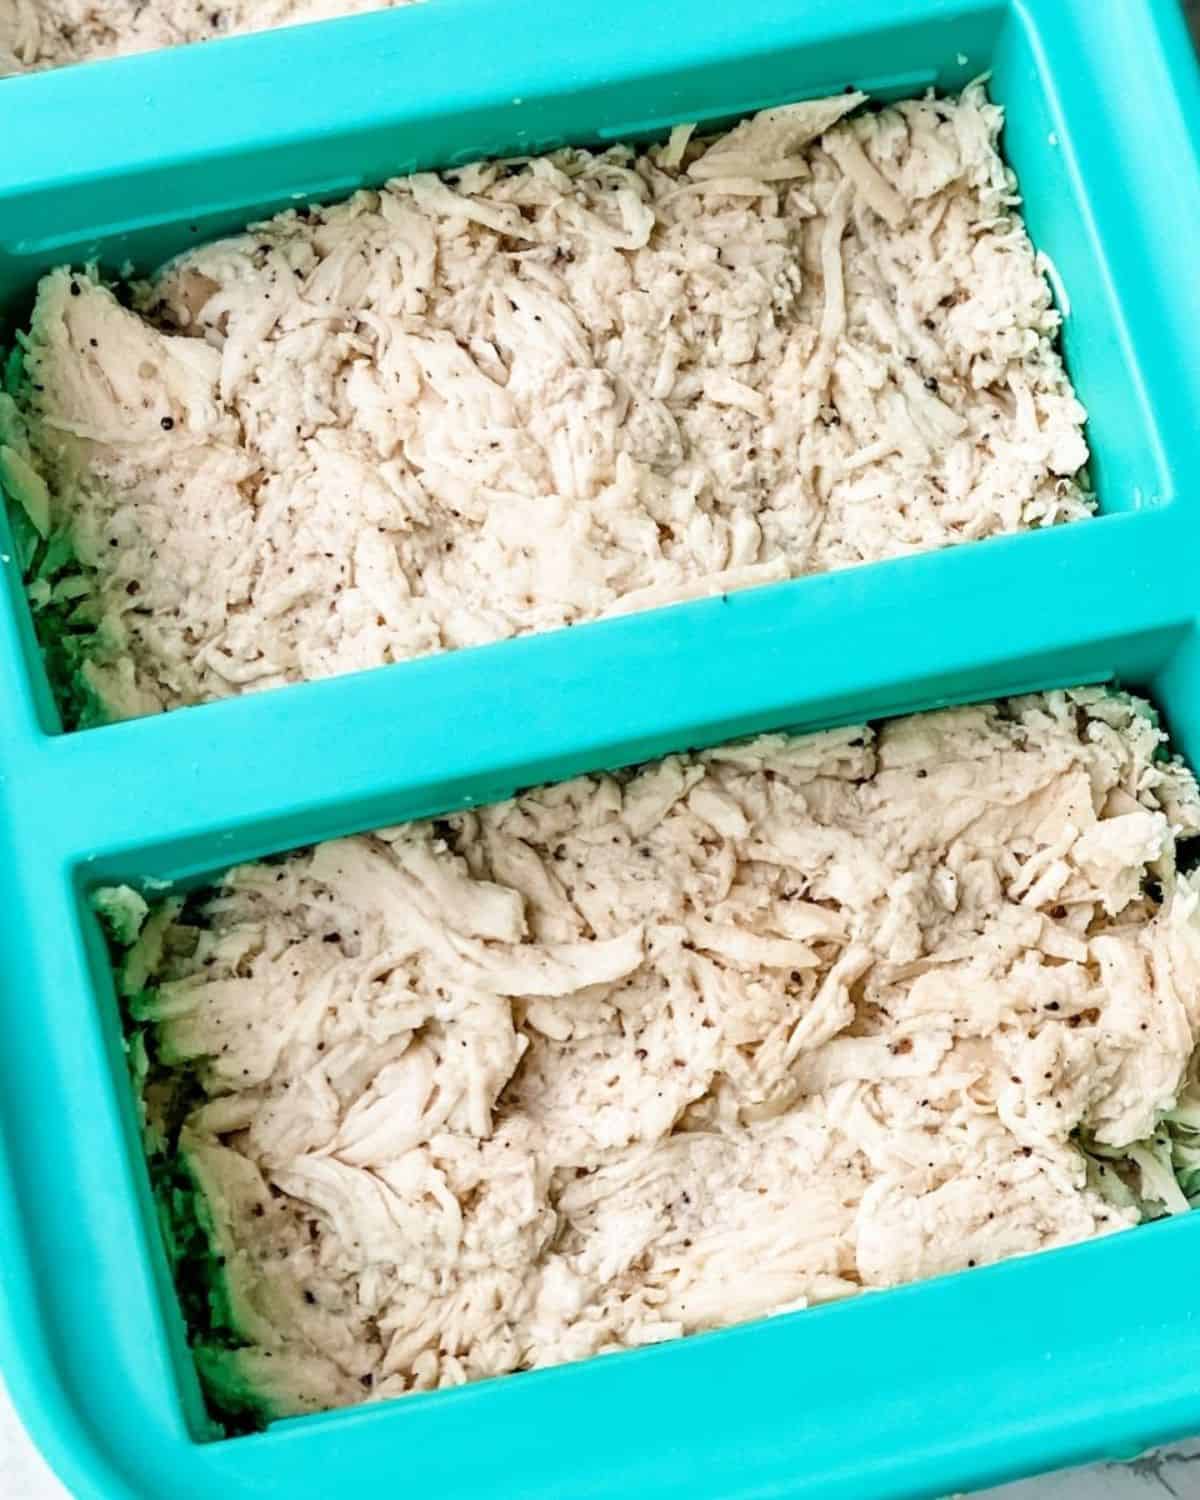 Souper Cubes Are Perfect for Make-Ahead Freezer Meals